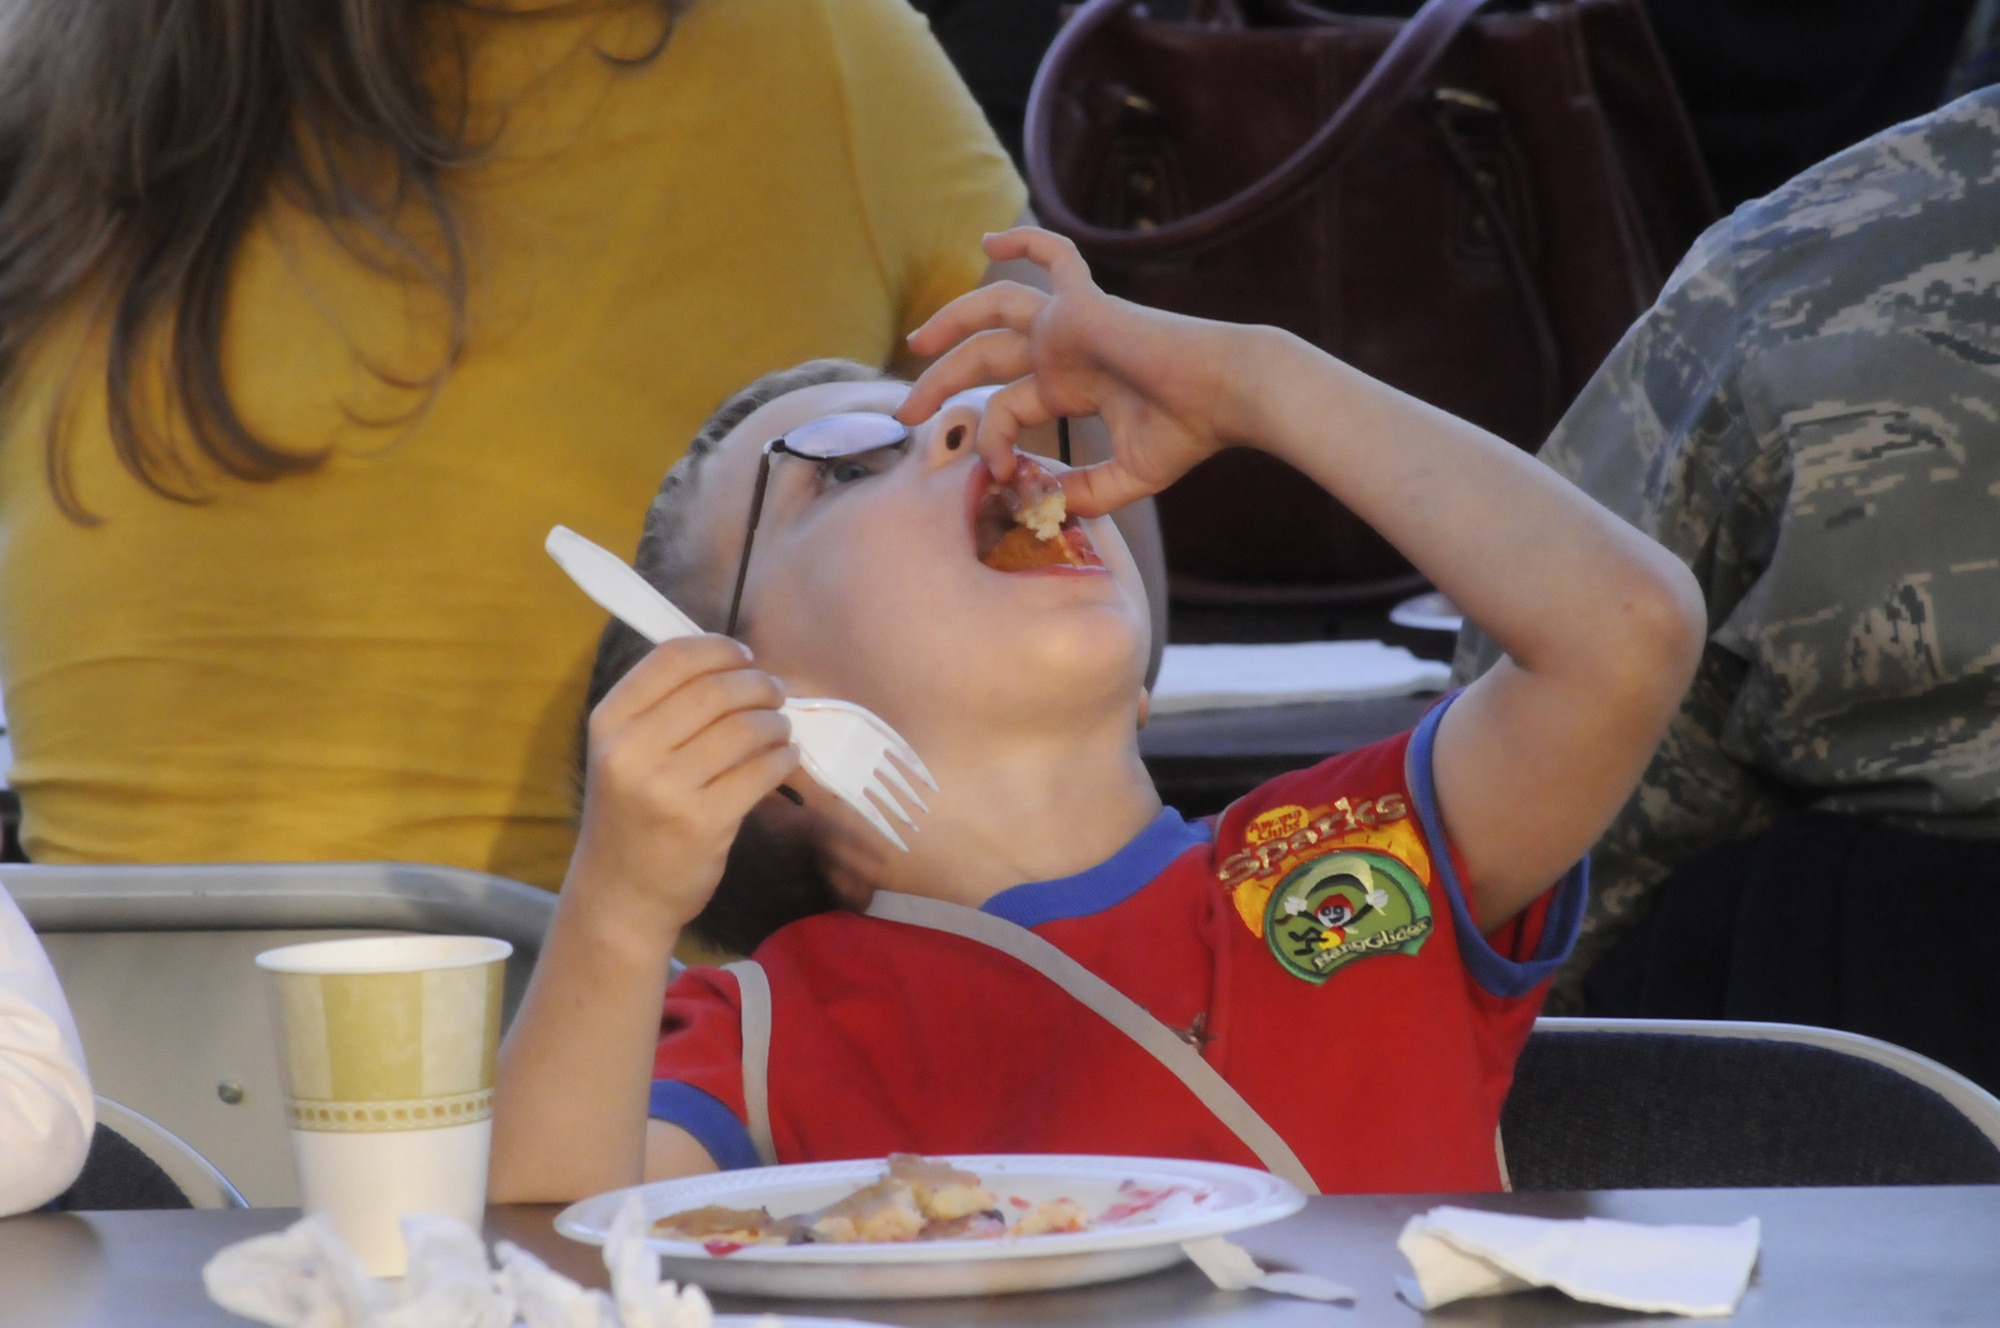 Sam Shelton, 5, chows down on his pancakes. Sam caught 3 pancakes and said they tasted "good". U. S. Air Force photo by Sue Sapp